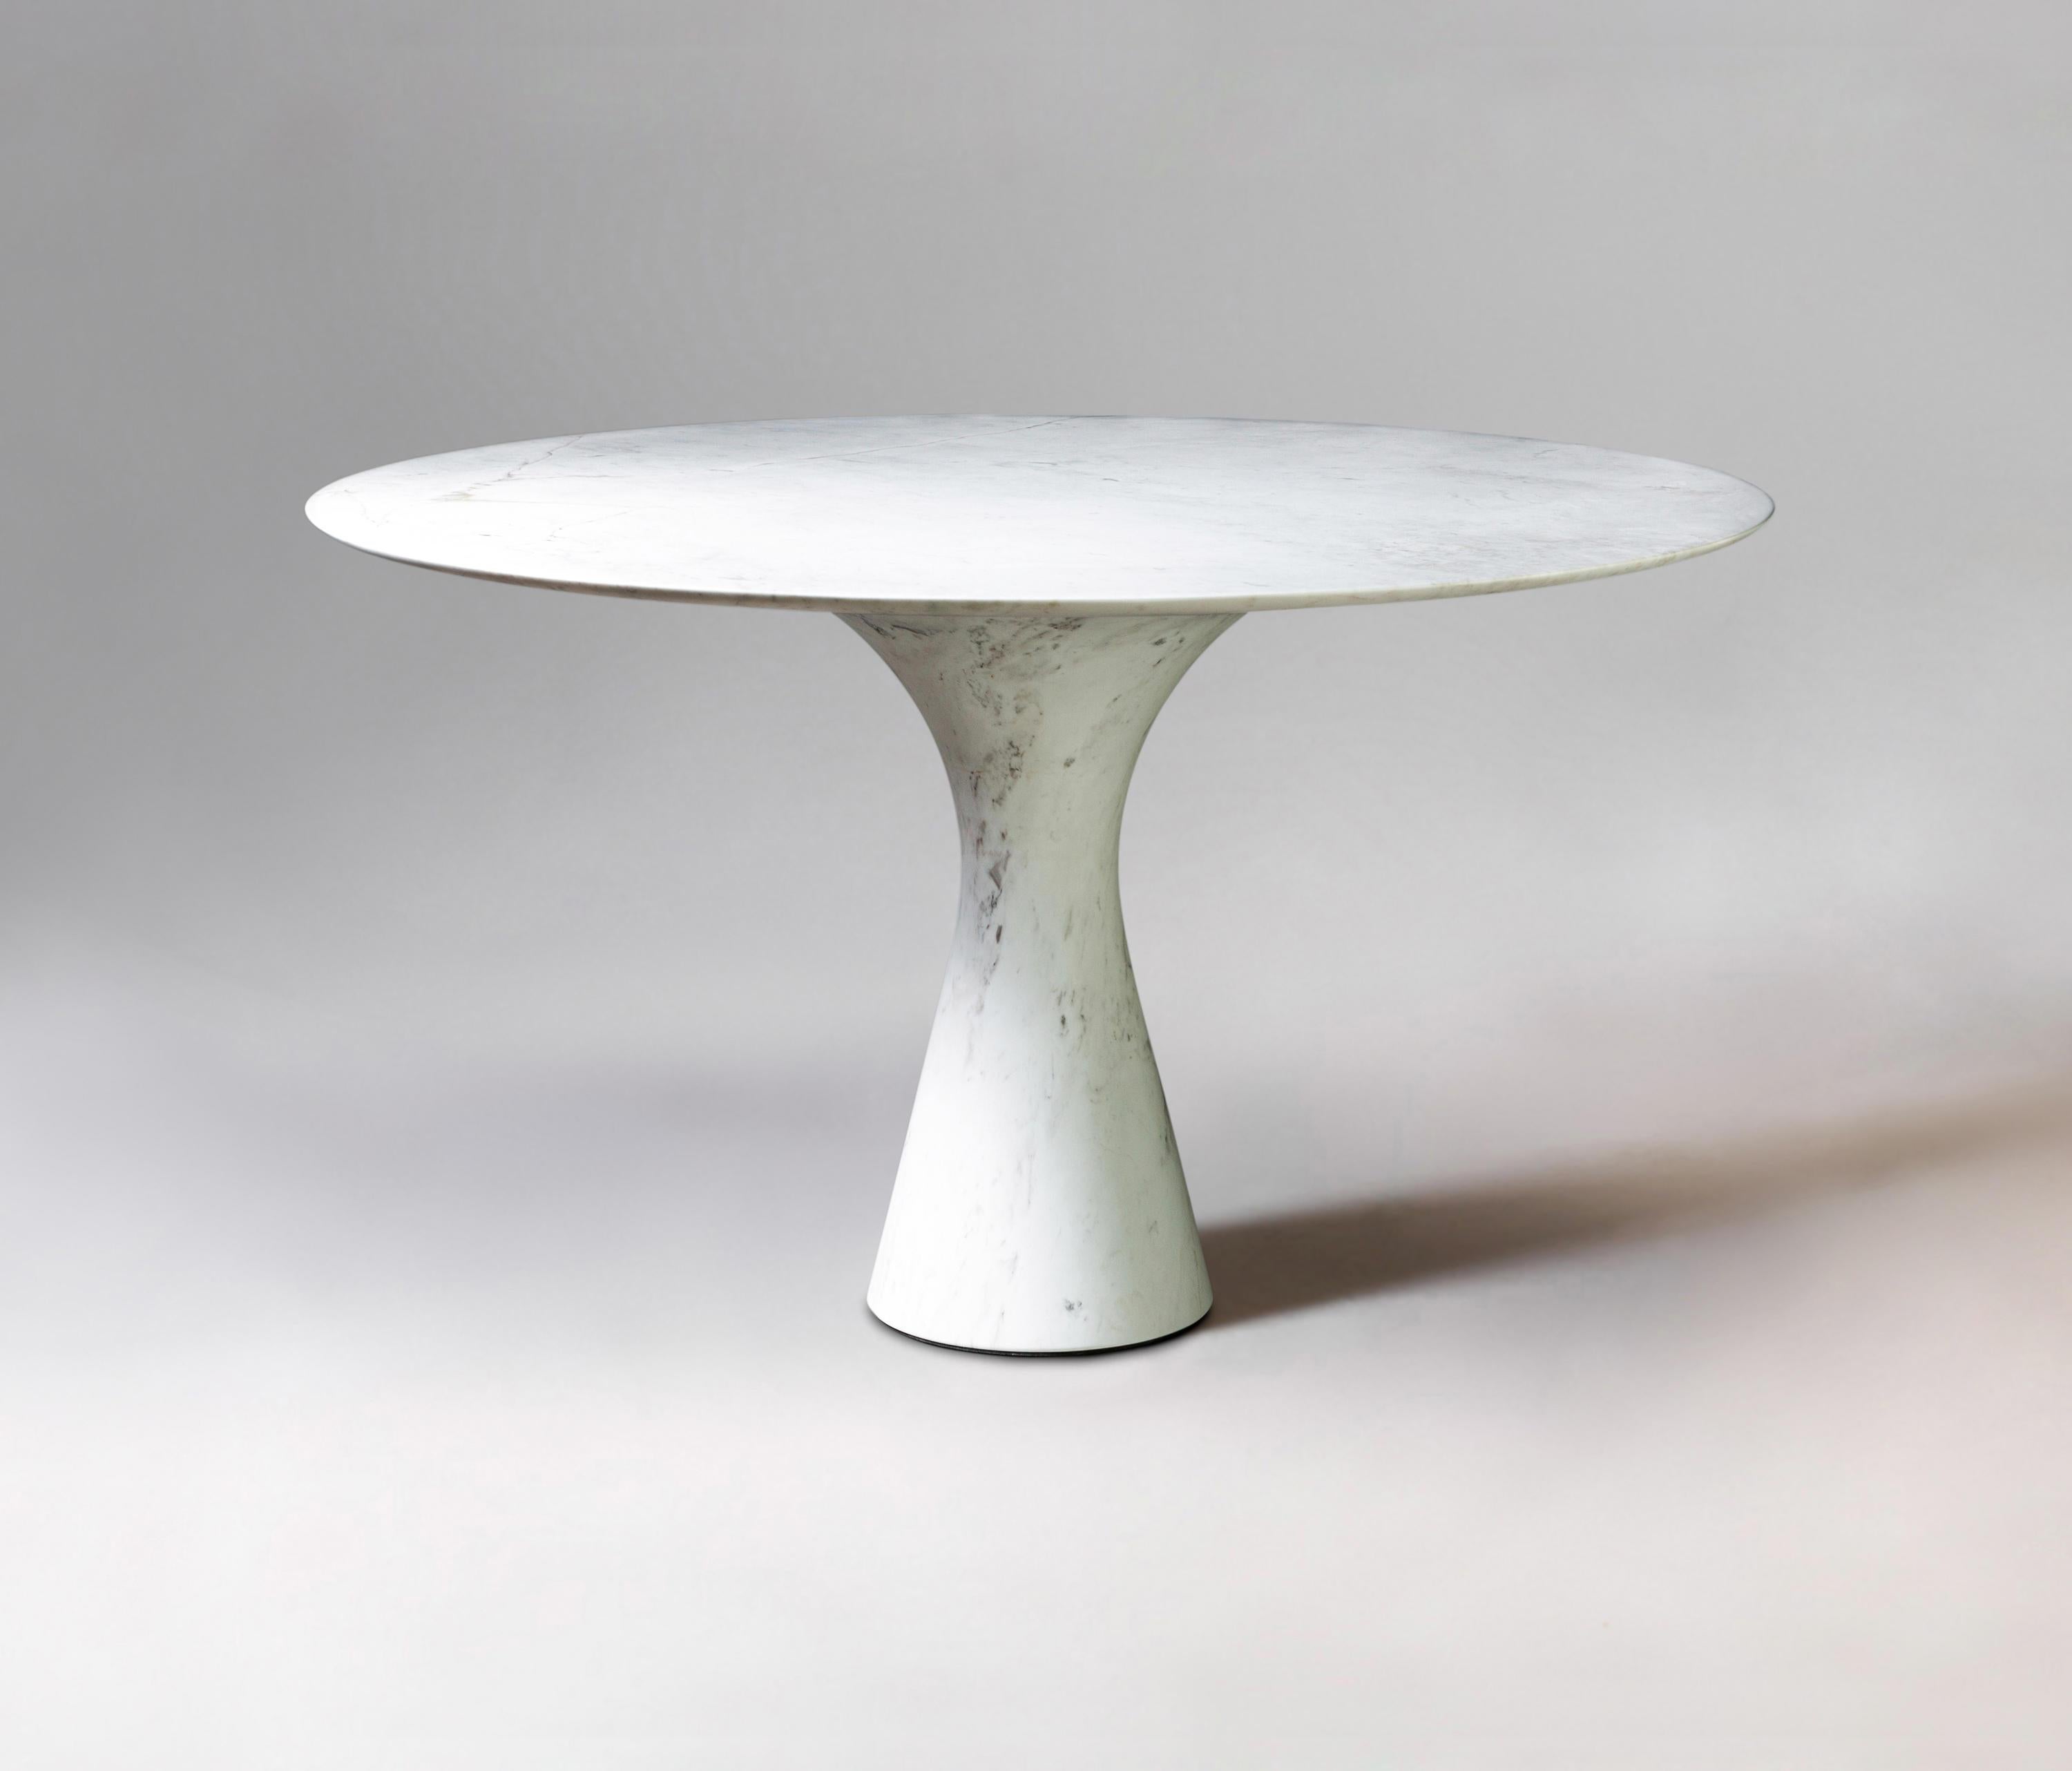 Kynos Refined Contemporary marble dining table 160/75
Dimensions: 160 x 75 cm
Materials: Kynos Marble

Angelo is the essence of a round table in natural stone, a sculptural shape in robust material with elegant lines and refined finishes.

The